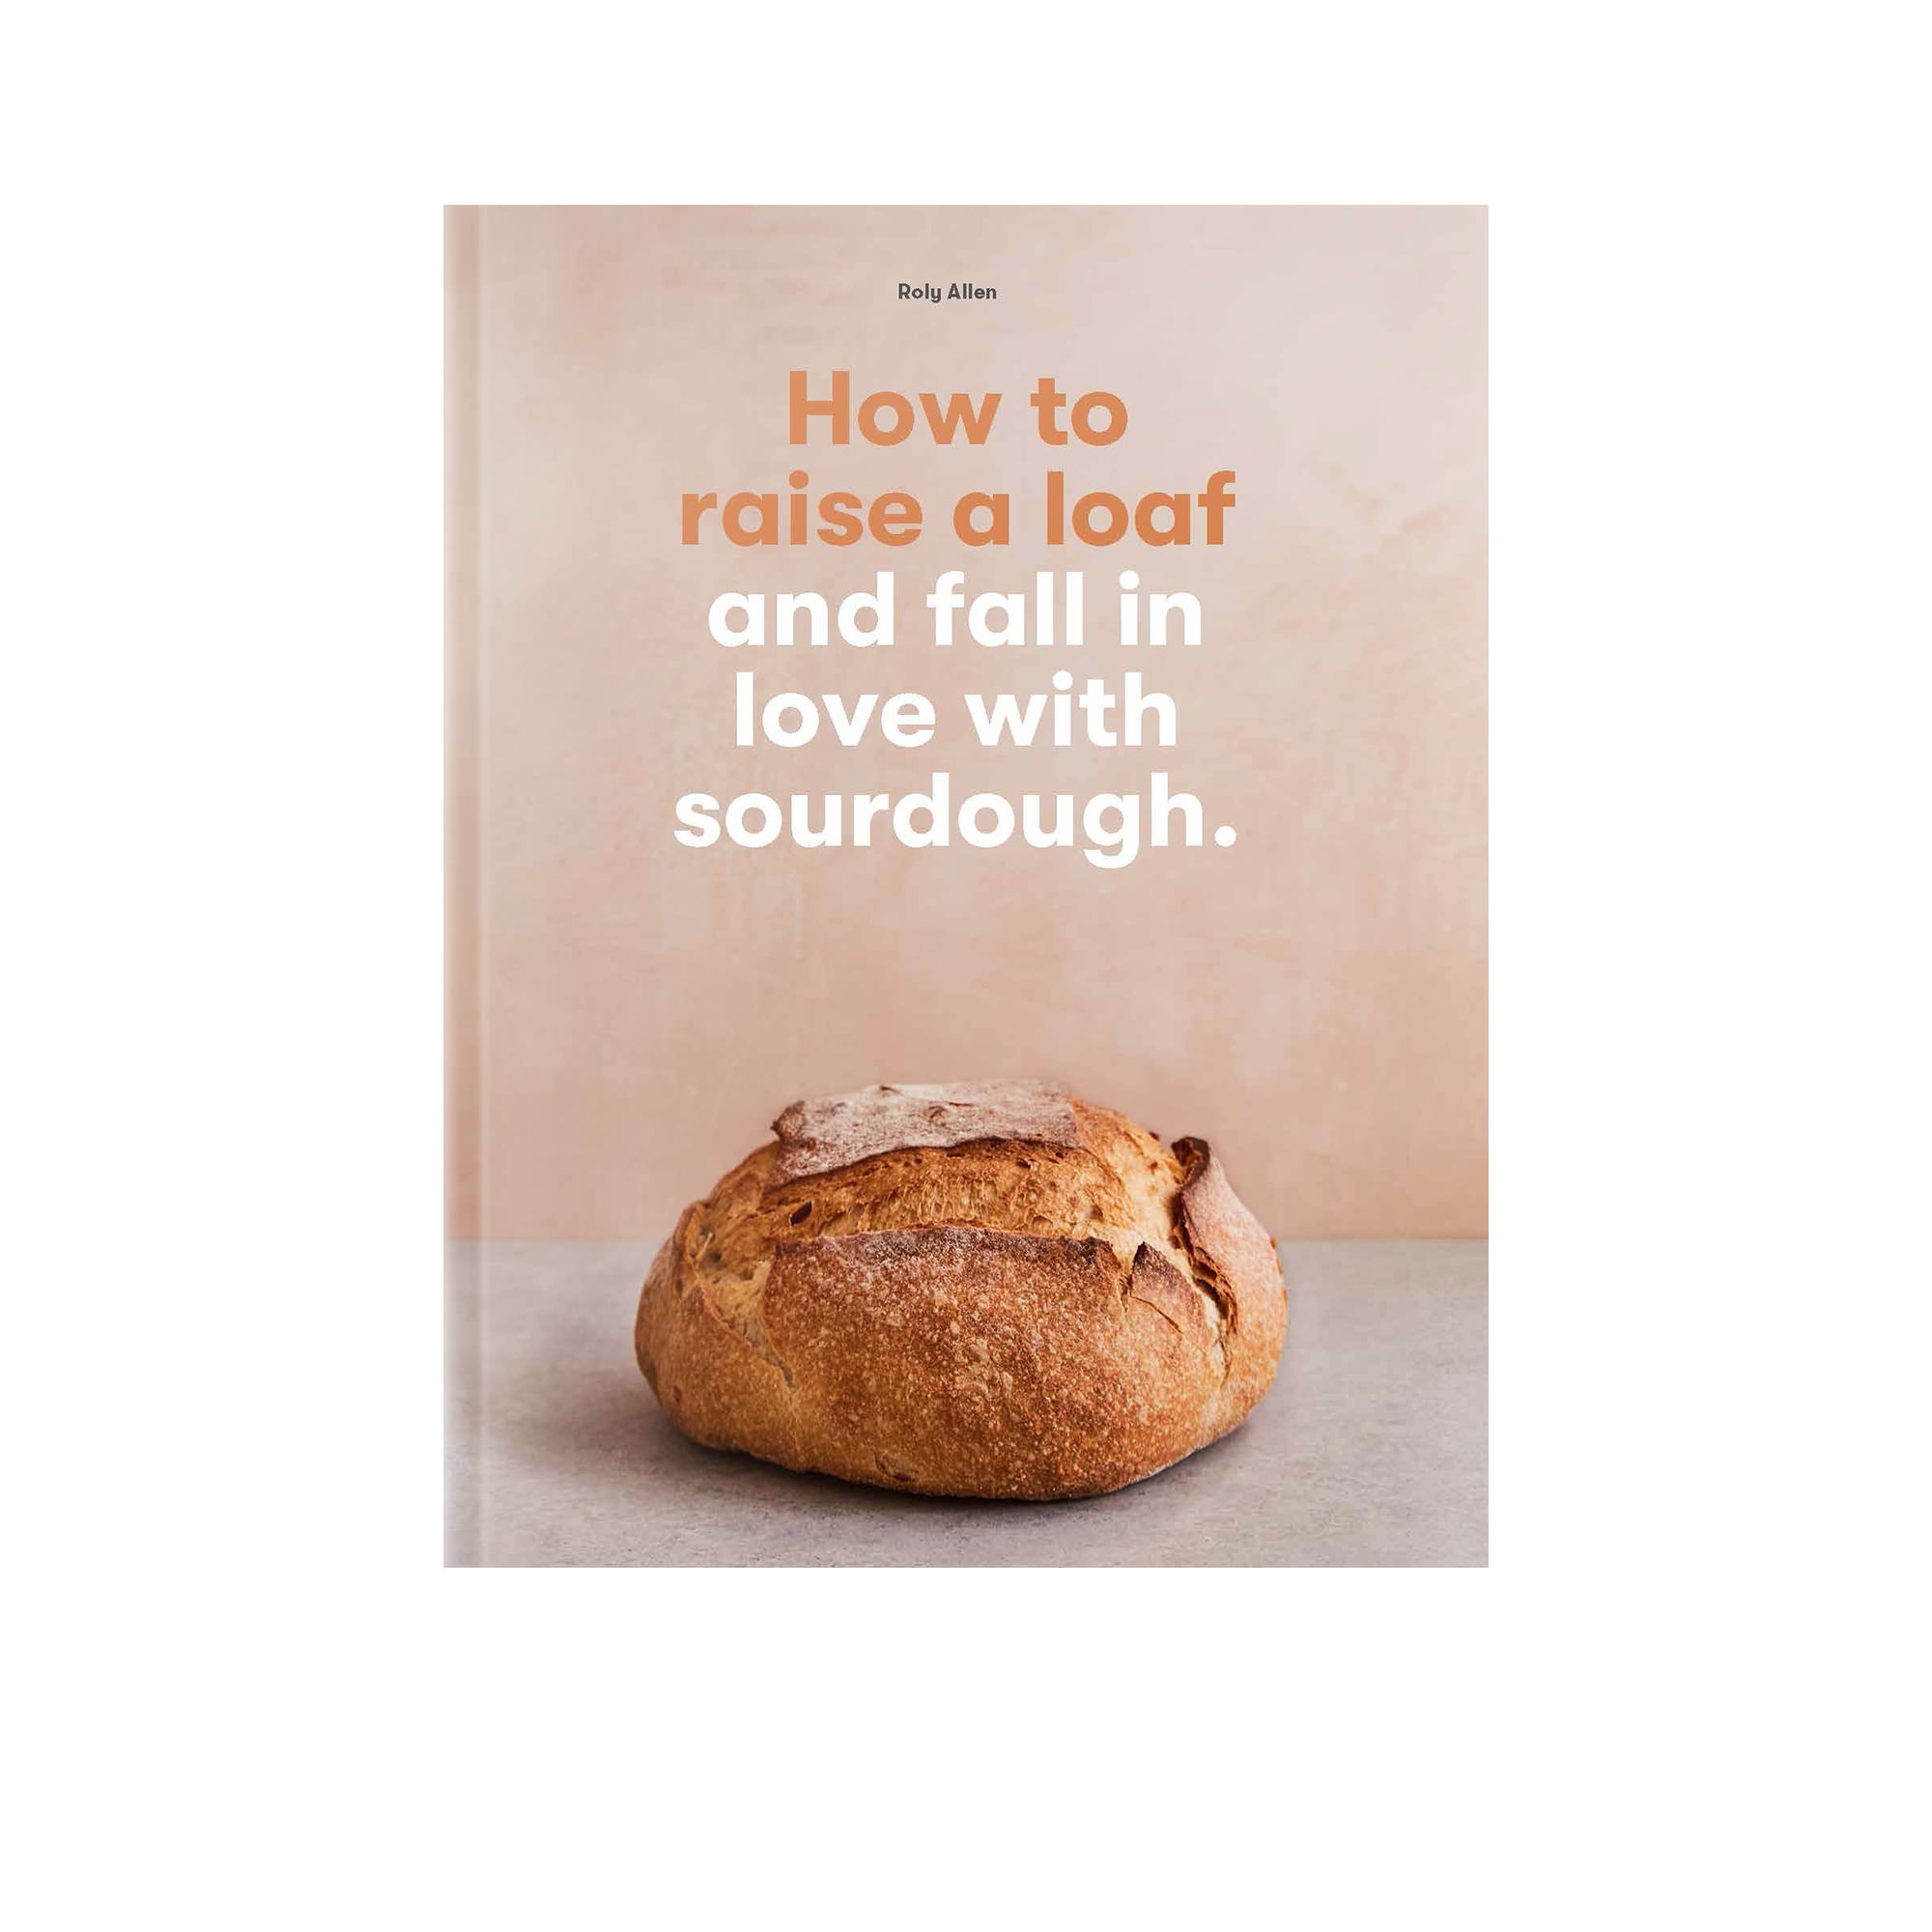 How to Raise a Loaf and Fall in Love with Sourdough by Roly Allen Image 1